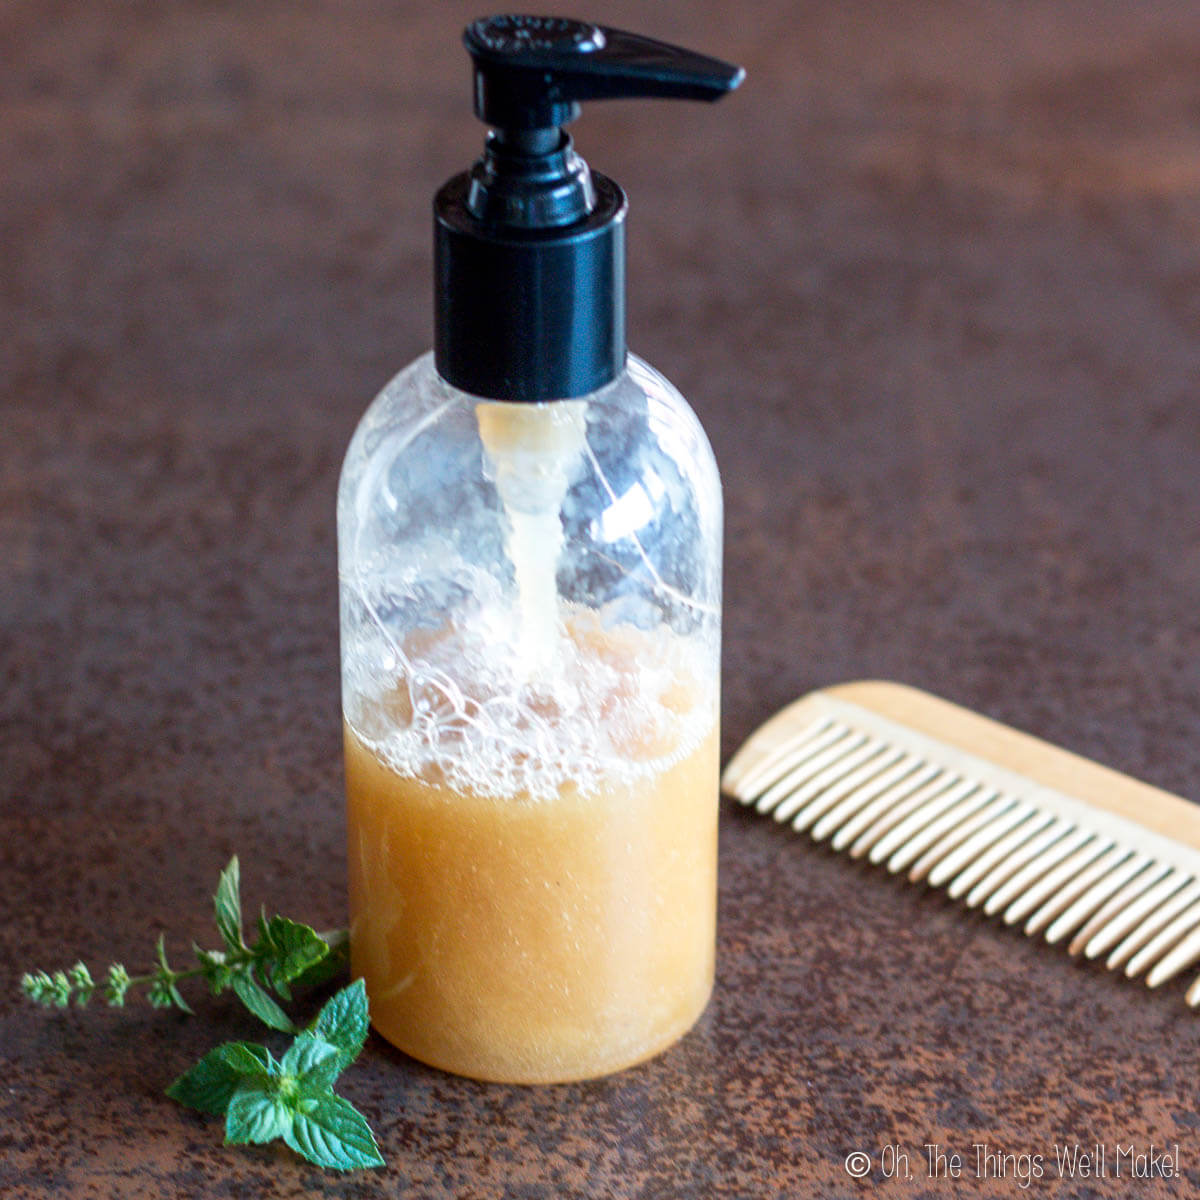 A bottle of shampoo in a pump bottle next to a wooden comb and a sprig of mint.